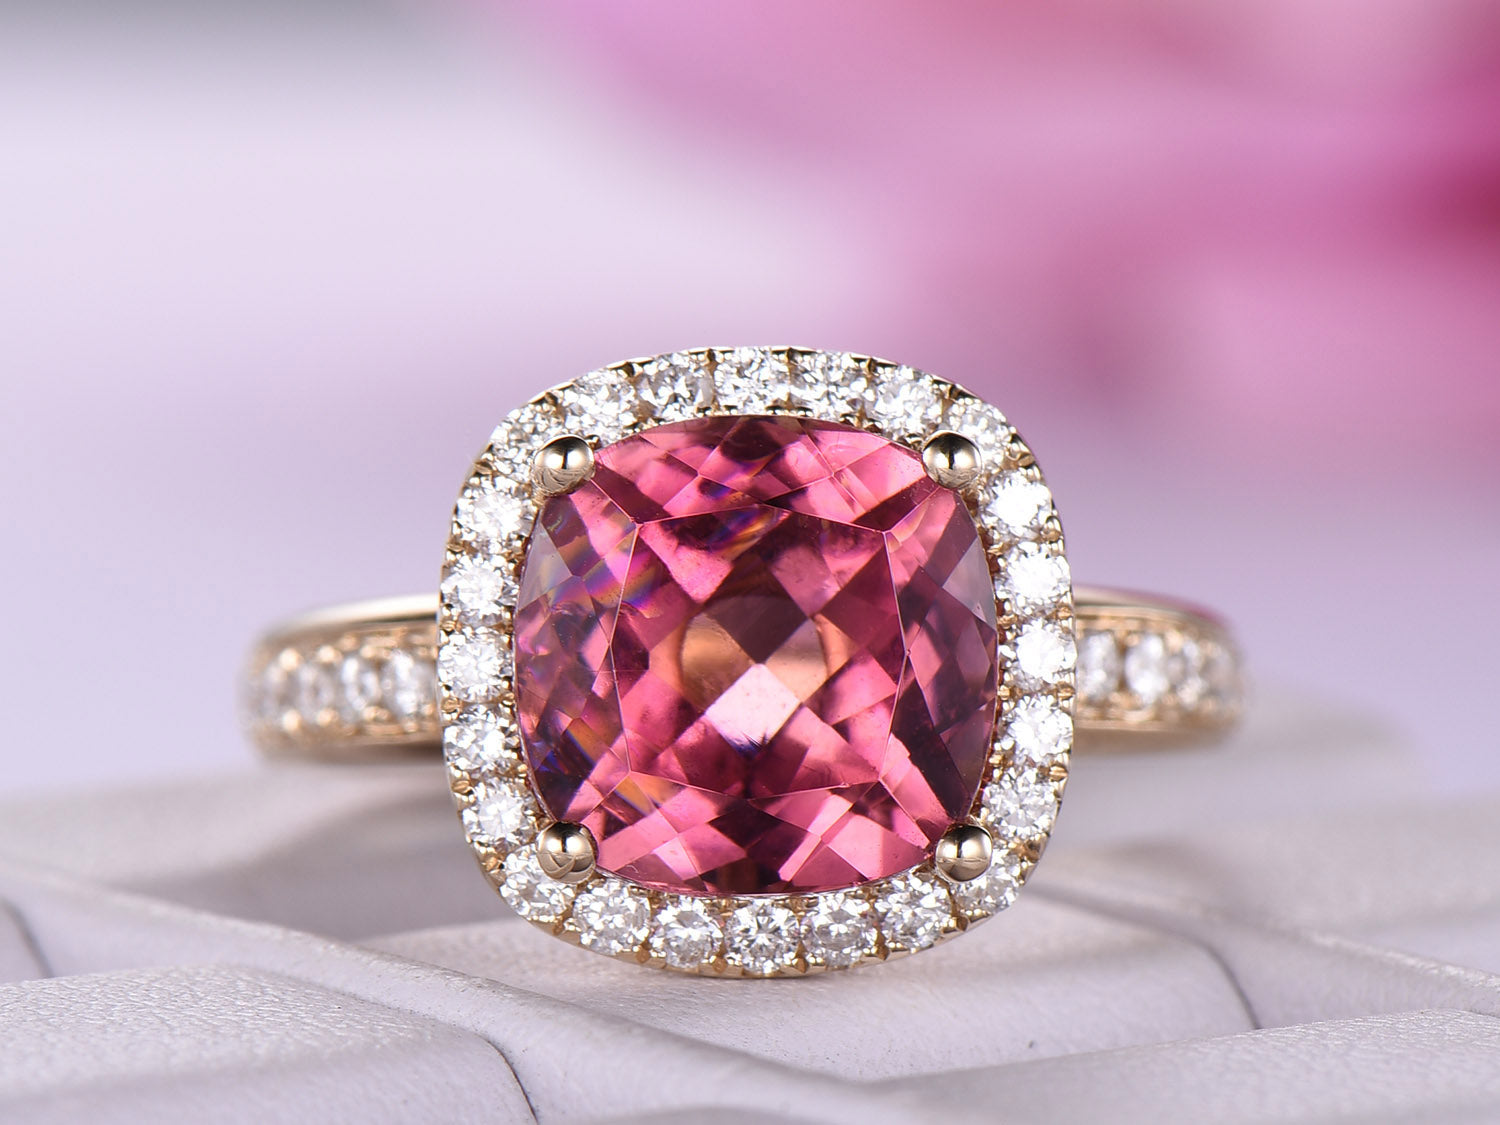 Reserved for Jo Pink Tourmaline  Ring 1.5mm Diamond Halo 14k yellow gold 5.22ct